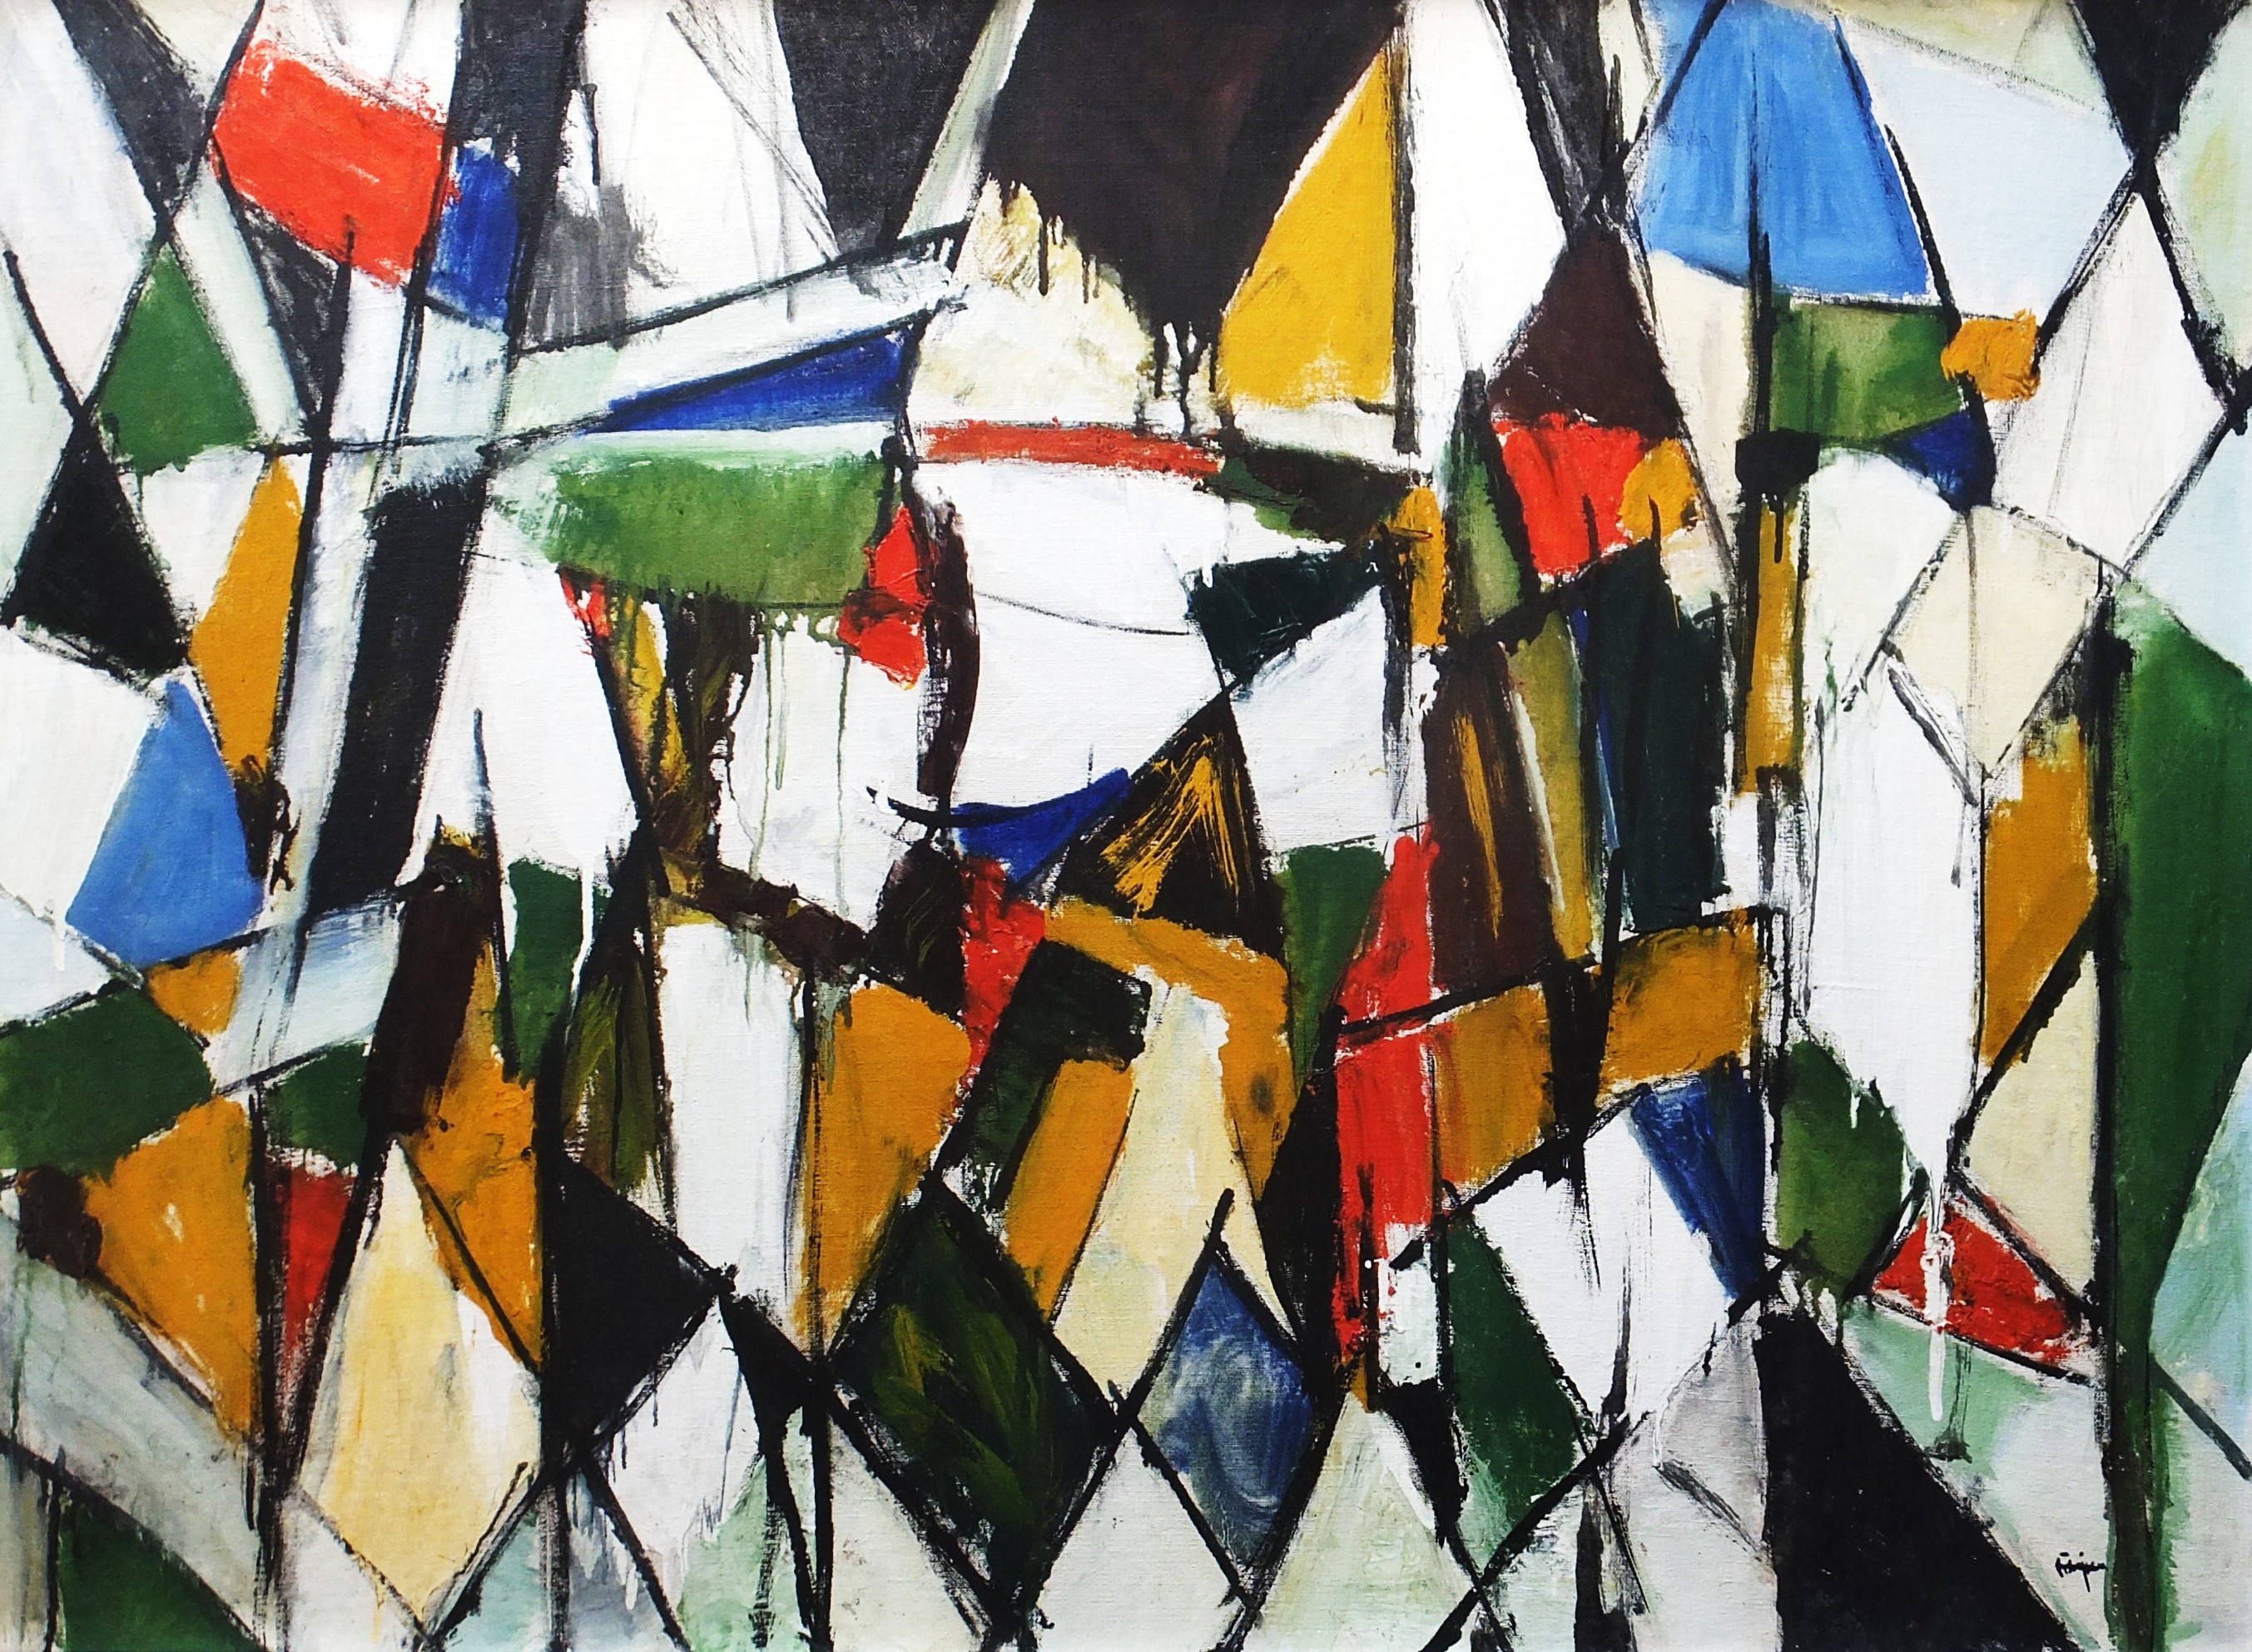 "Untitled #4687, Woodstock, Twin Mountain" by Arthur PInajian, 1960. Oil on canvas, 29 x 40 inches. 